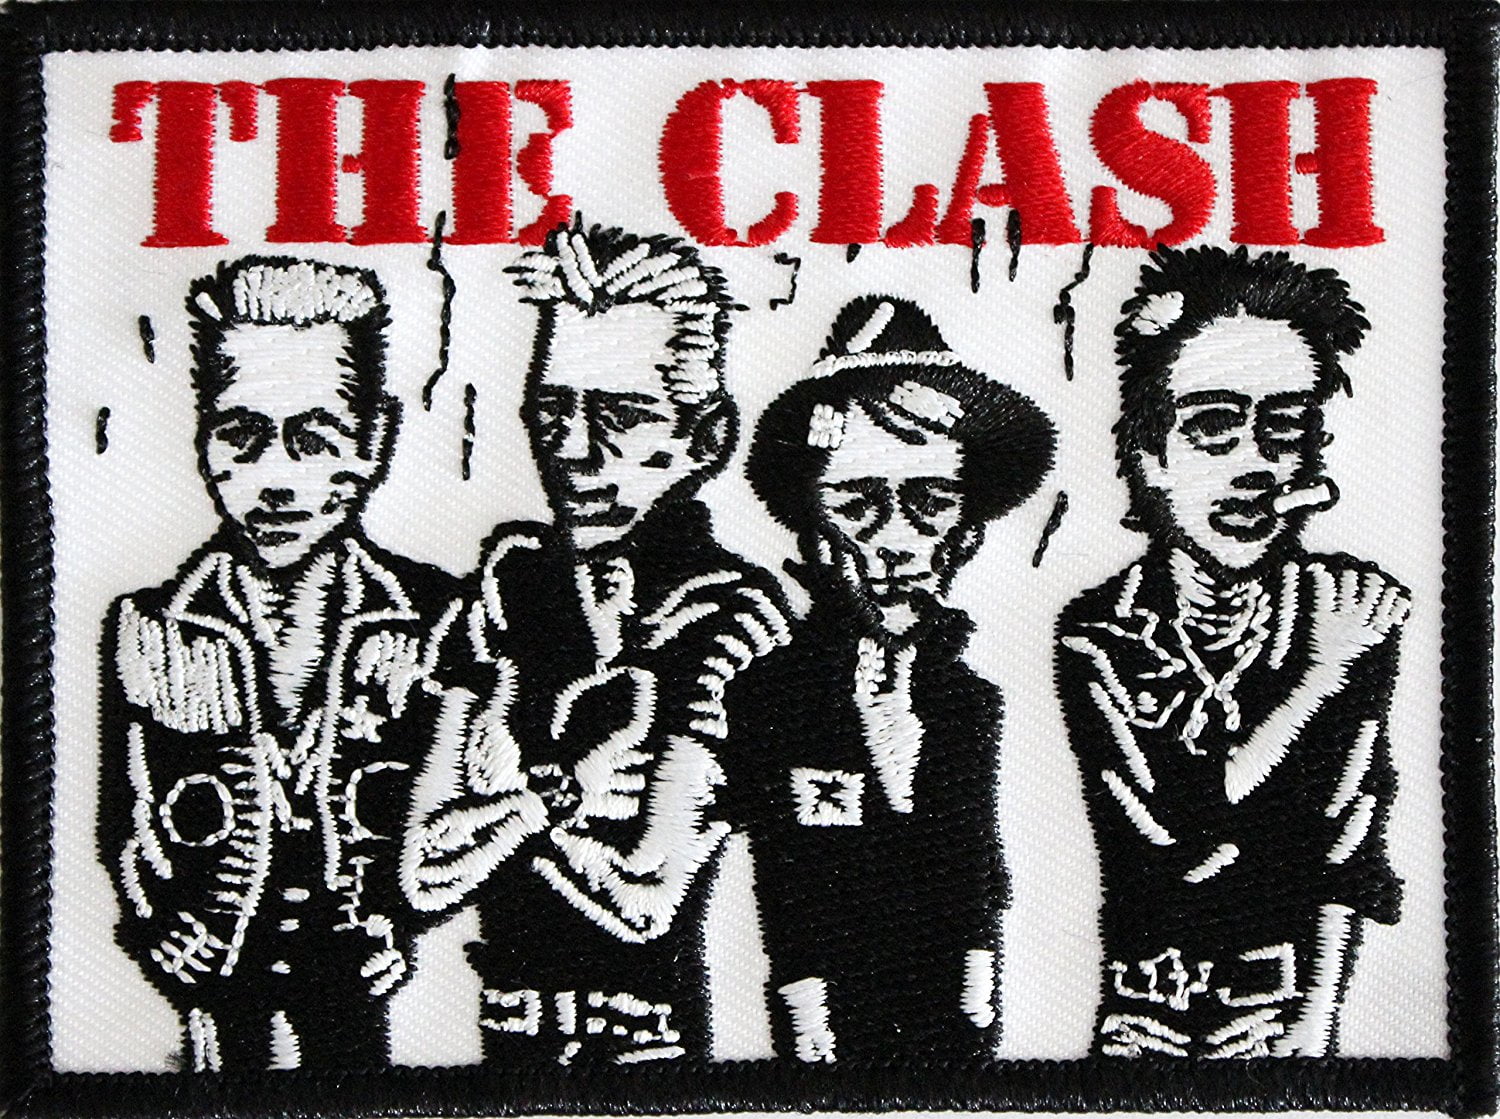 16x16 12x12 The Clash Album Cover stretched canvas wall art 20x20